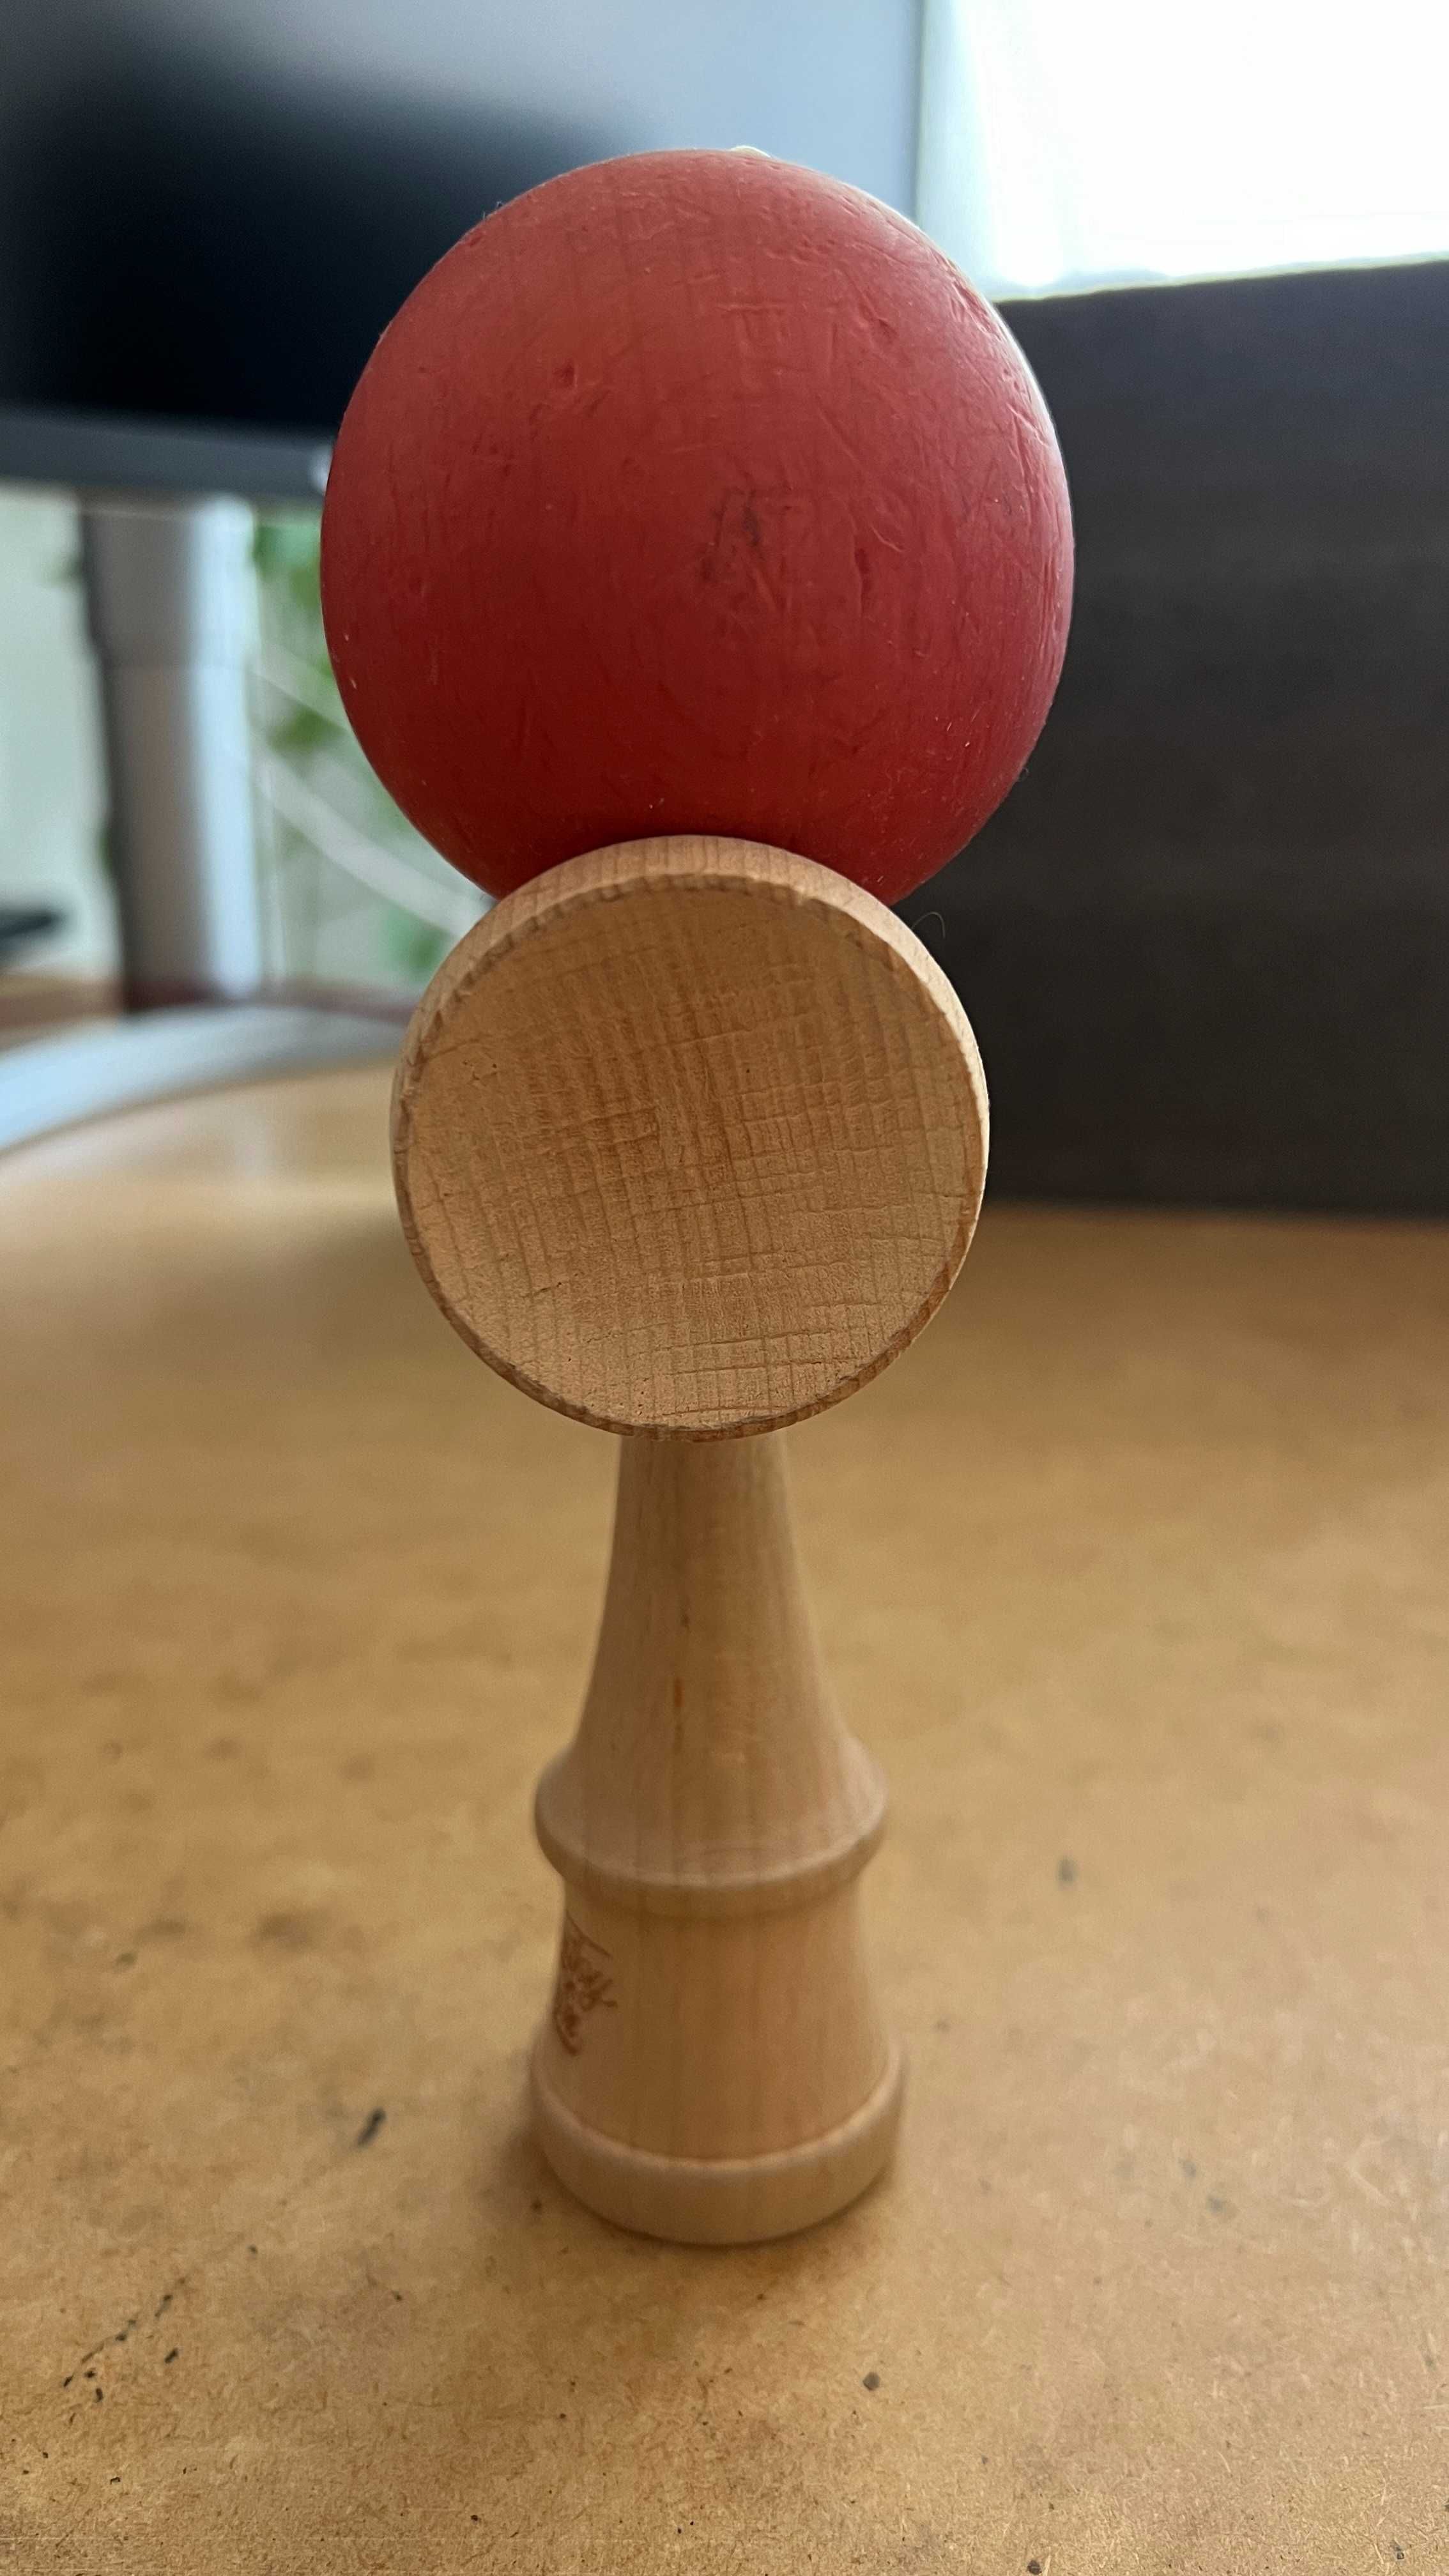 Kendama - A New Toy In Town